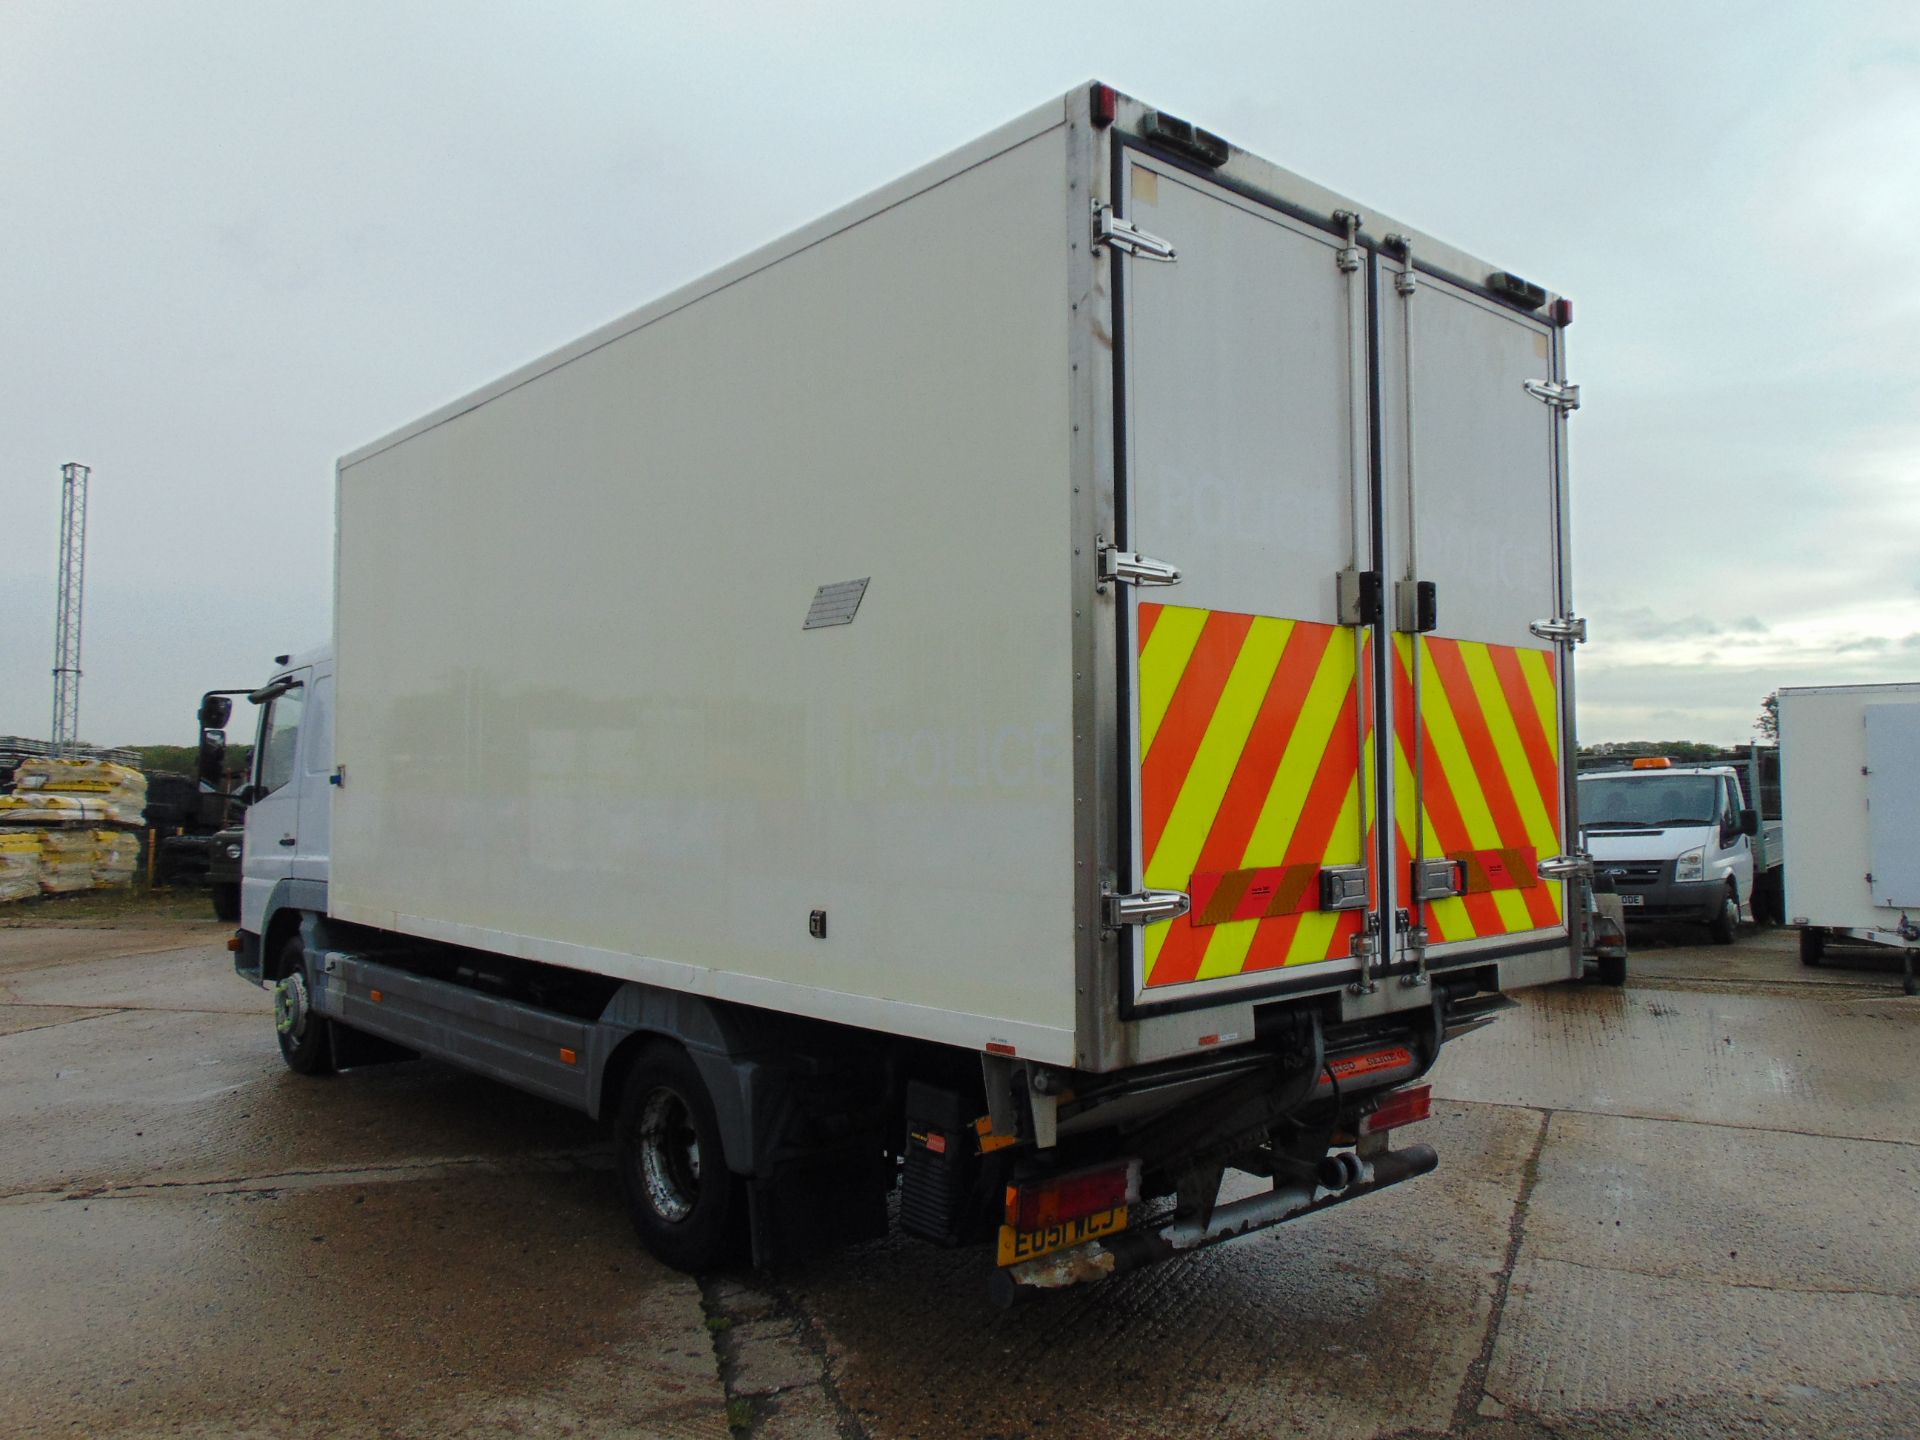 2001 Mercedes Benz Atego 1018 Box Truck C/W Tail Lift - Image 8 of 21